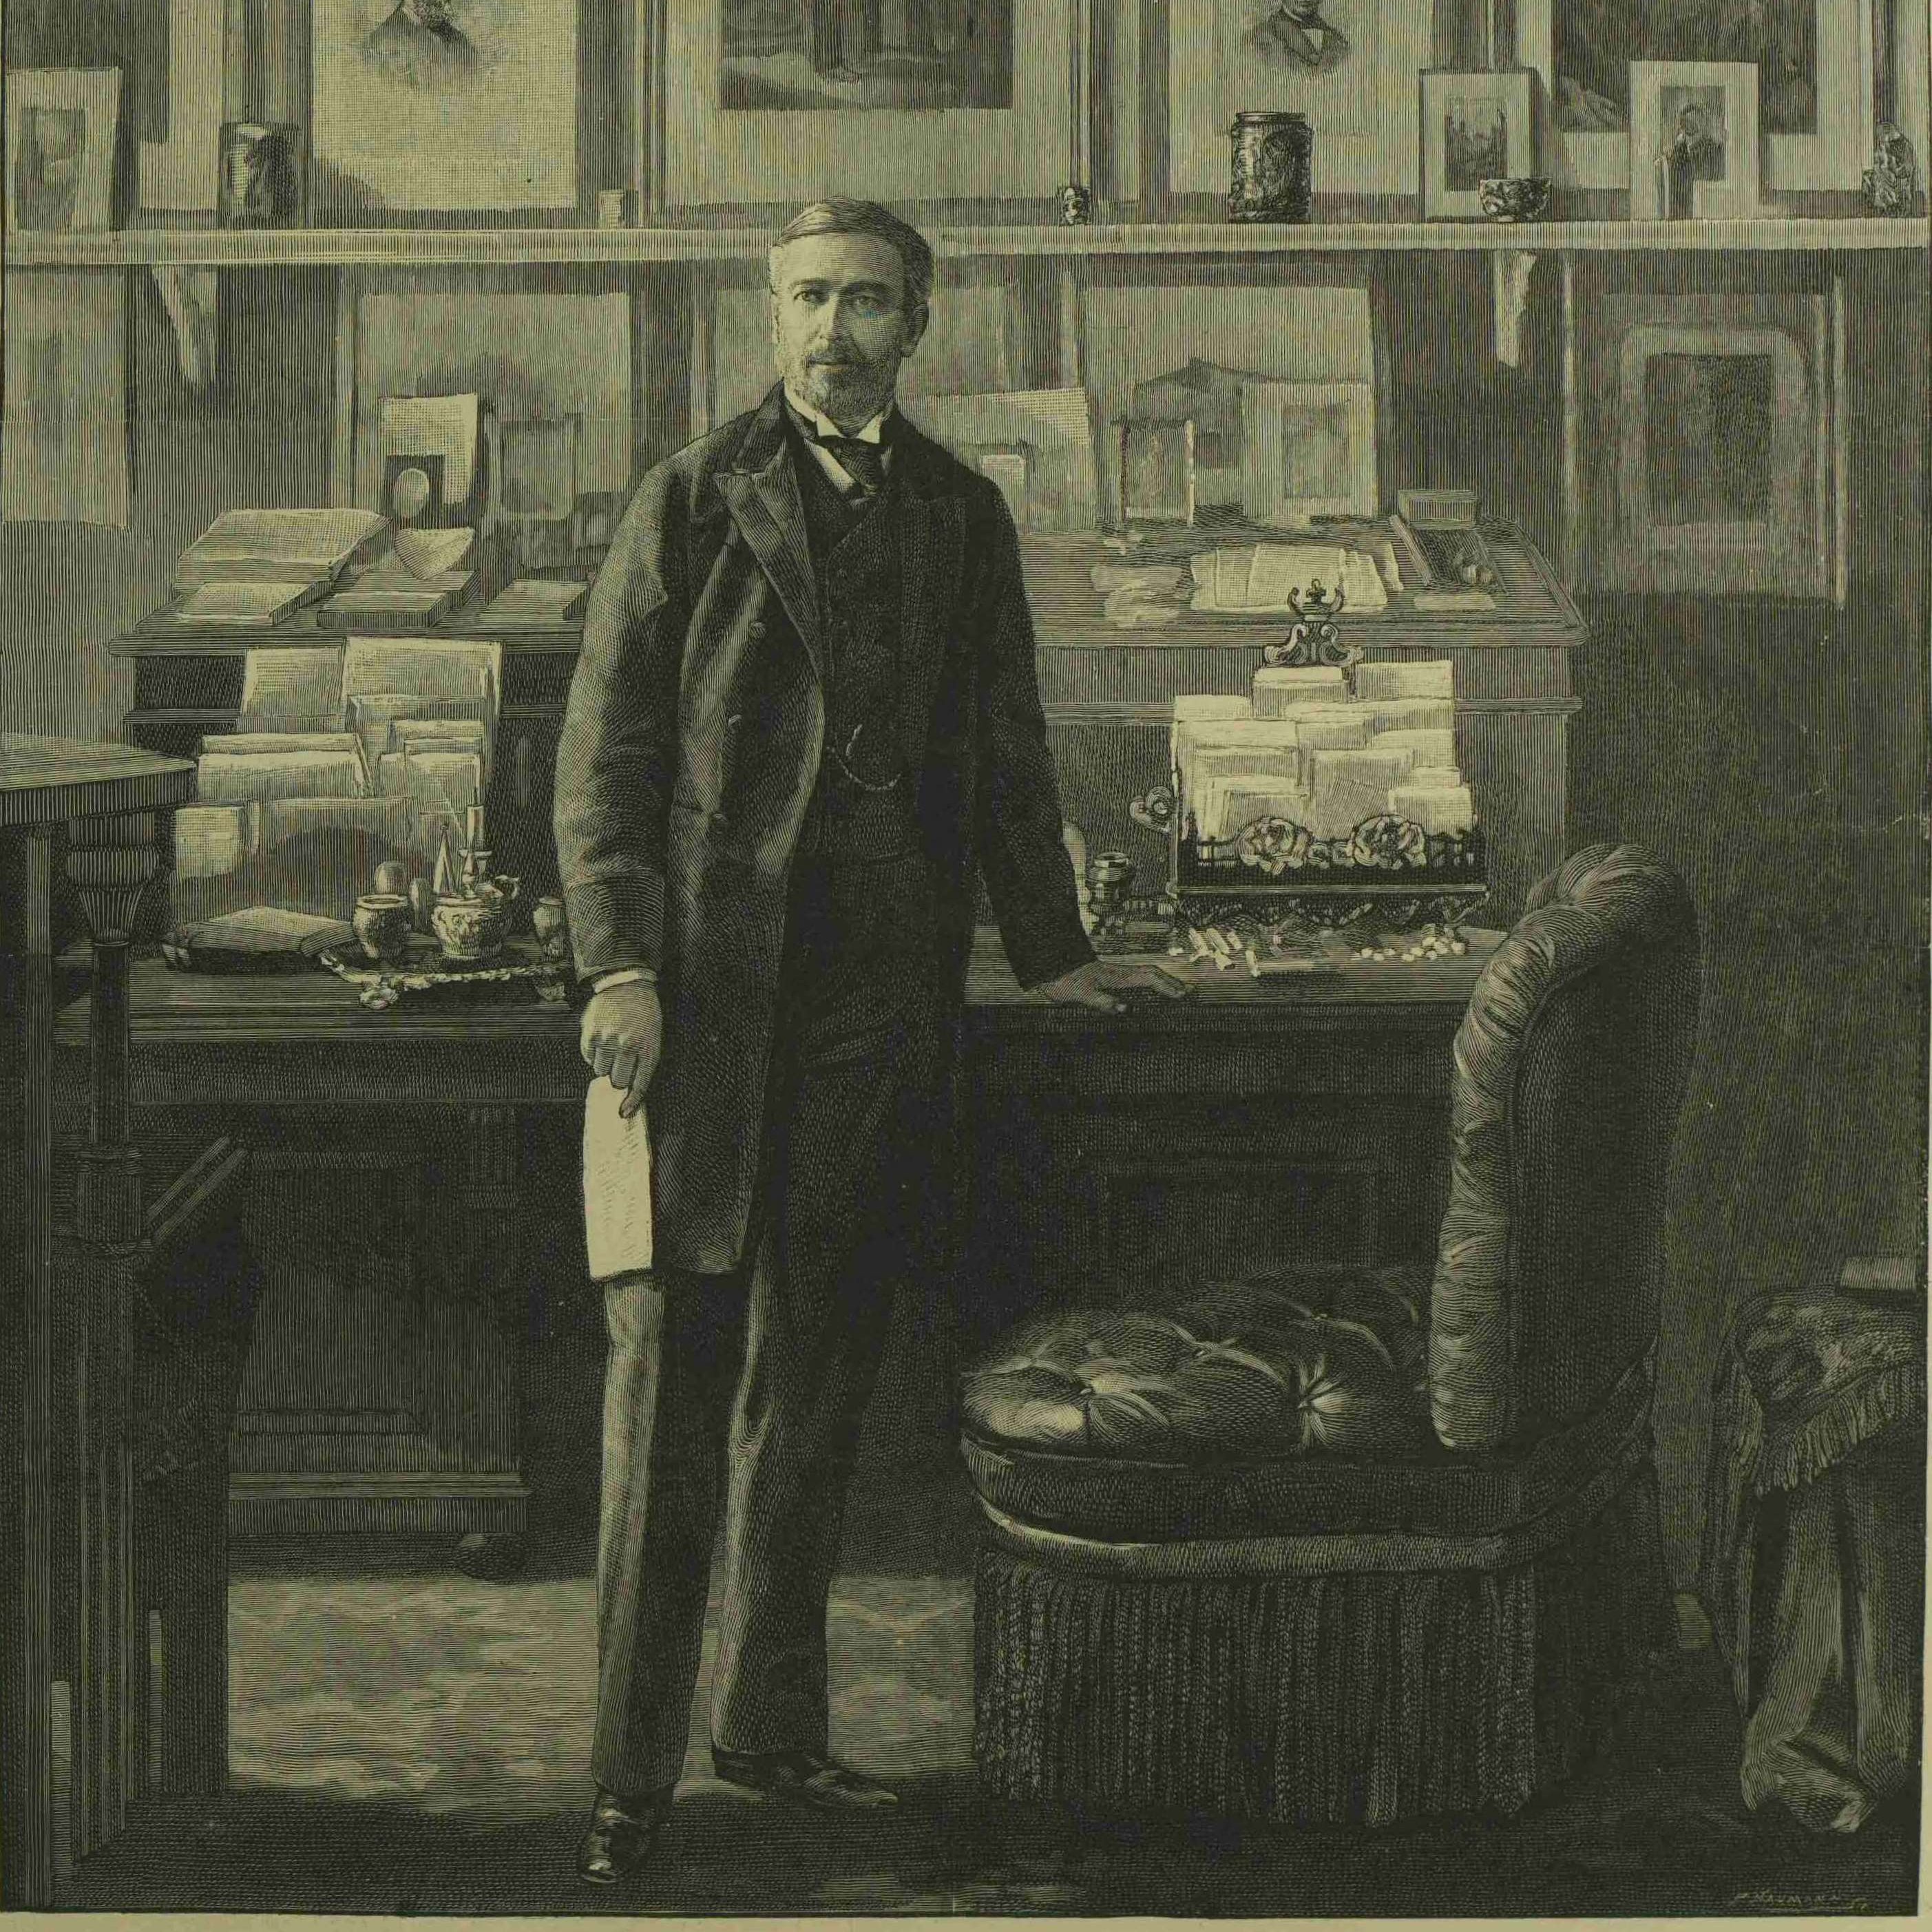 Engraving of a portrait of Sir Edward Malet in his study at the British embassy, Berlin, 1893